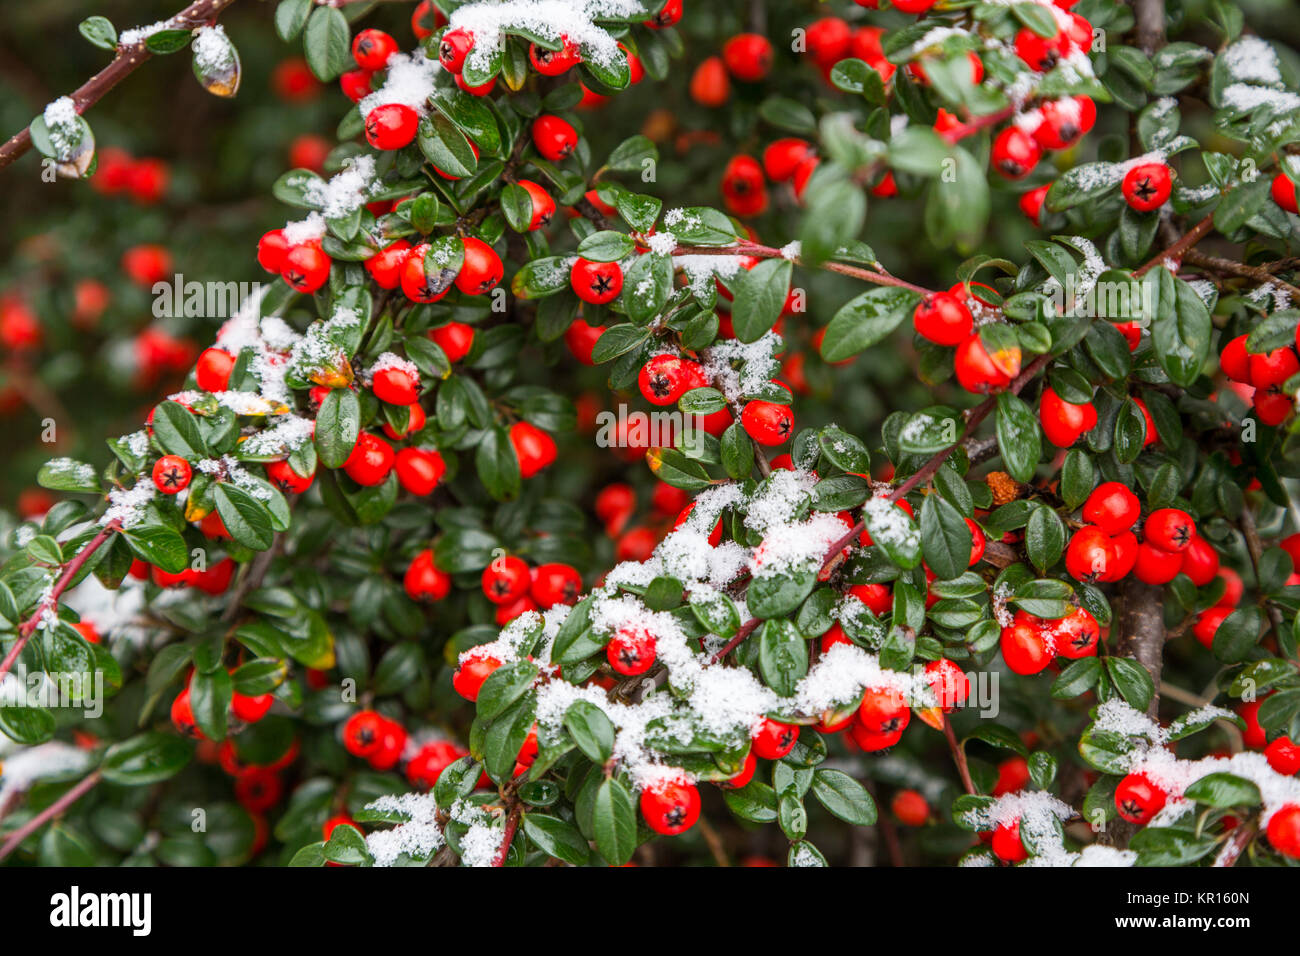 A Cotoneaster shrub with bright red berries covered in snow on a cold winter december day sets a Christmas theme. England ,UK Stock Photo